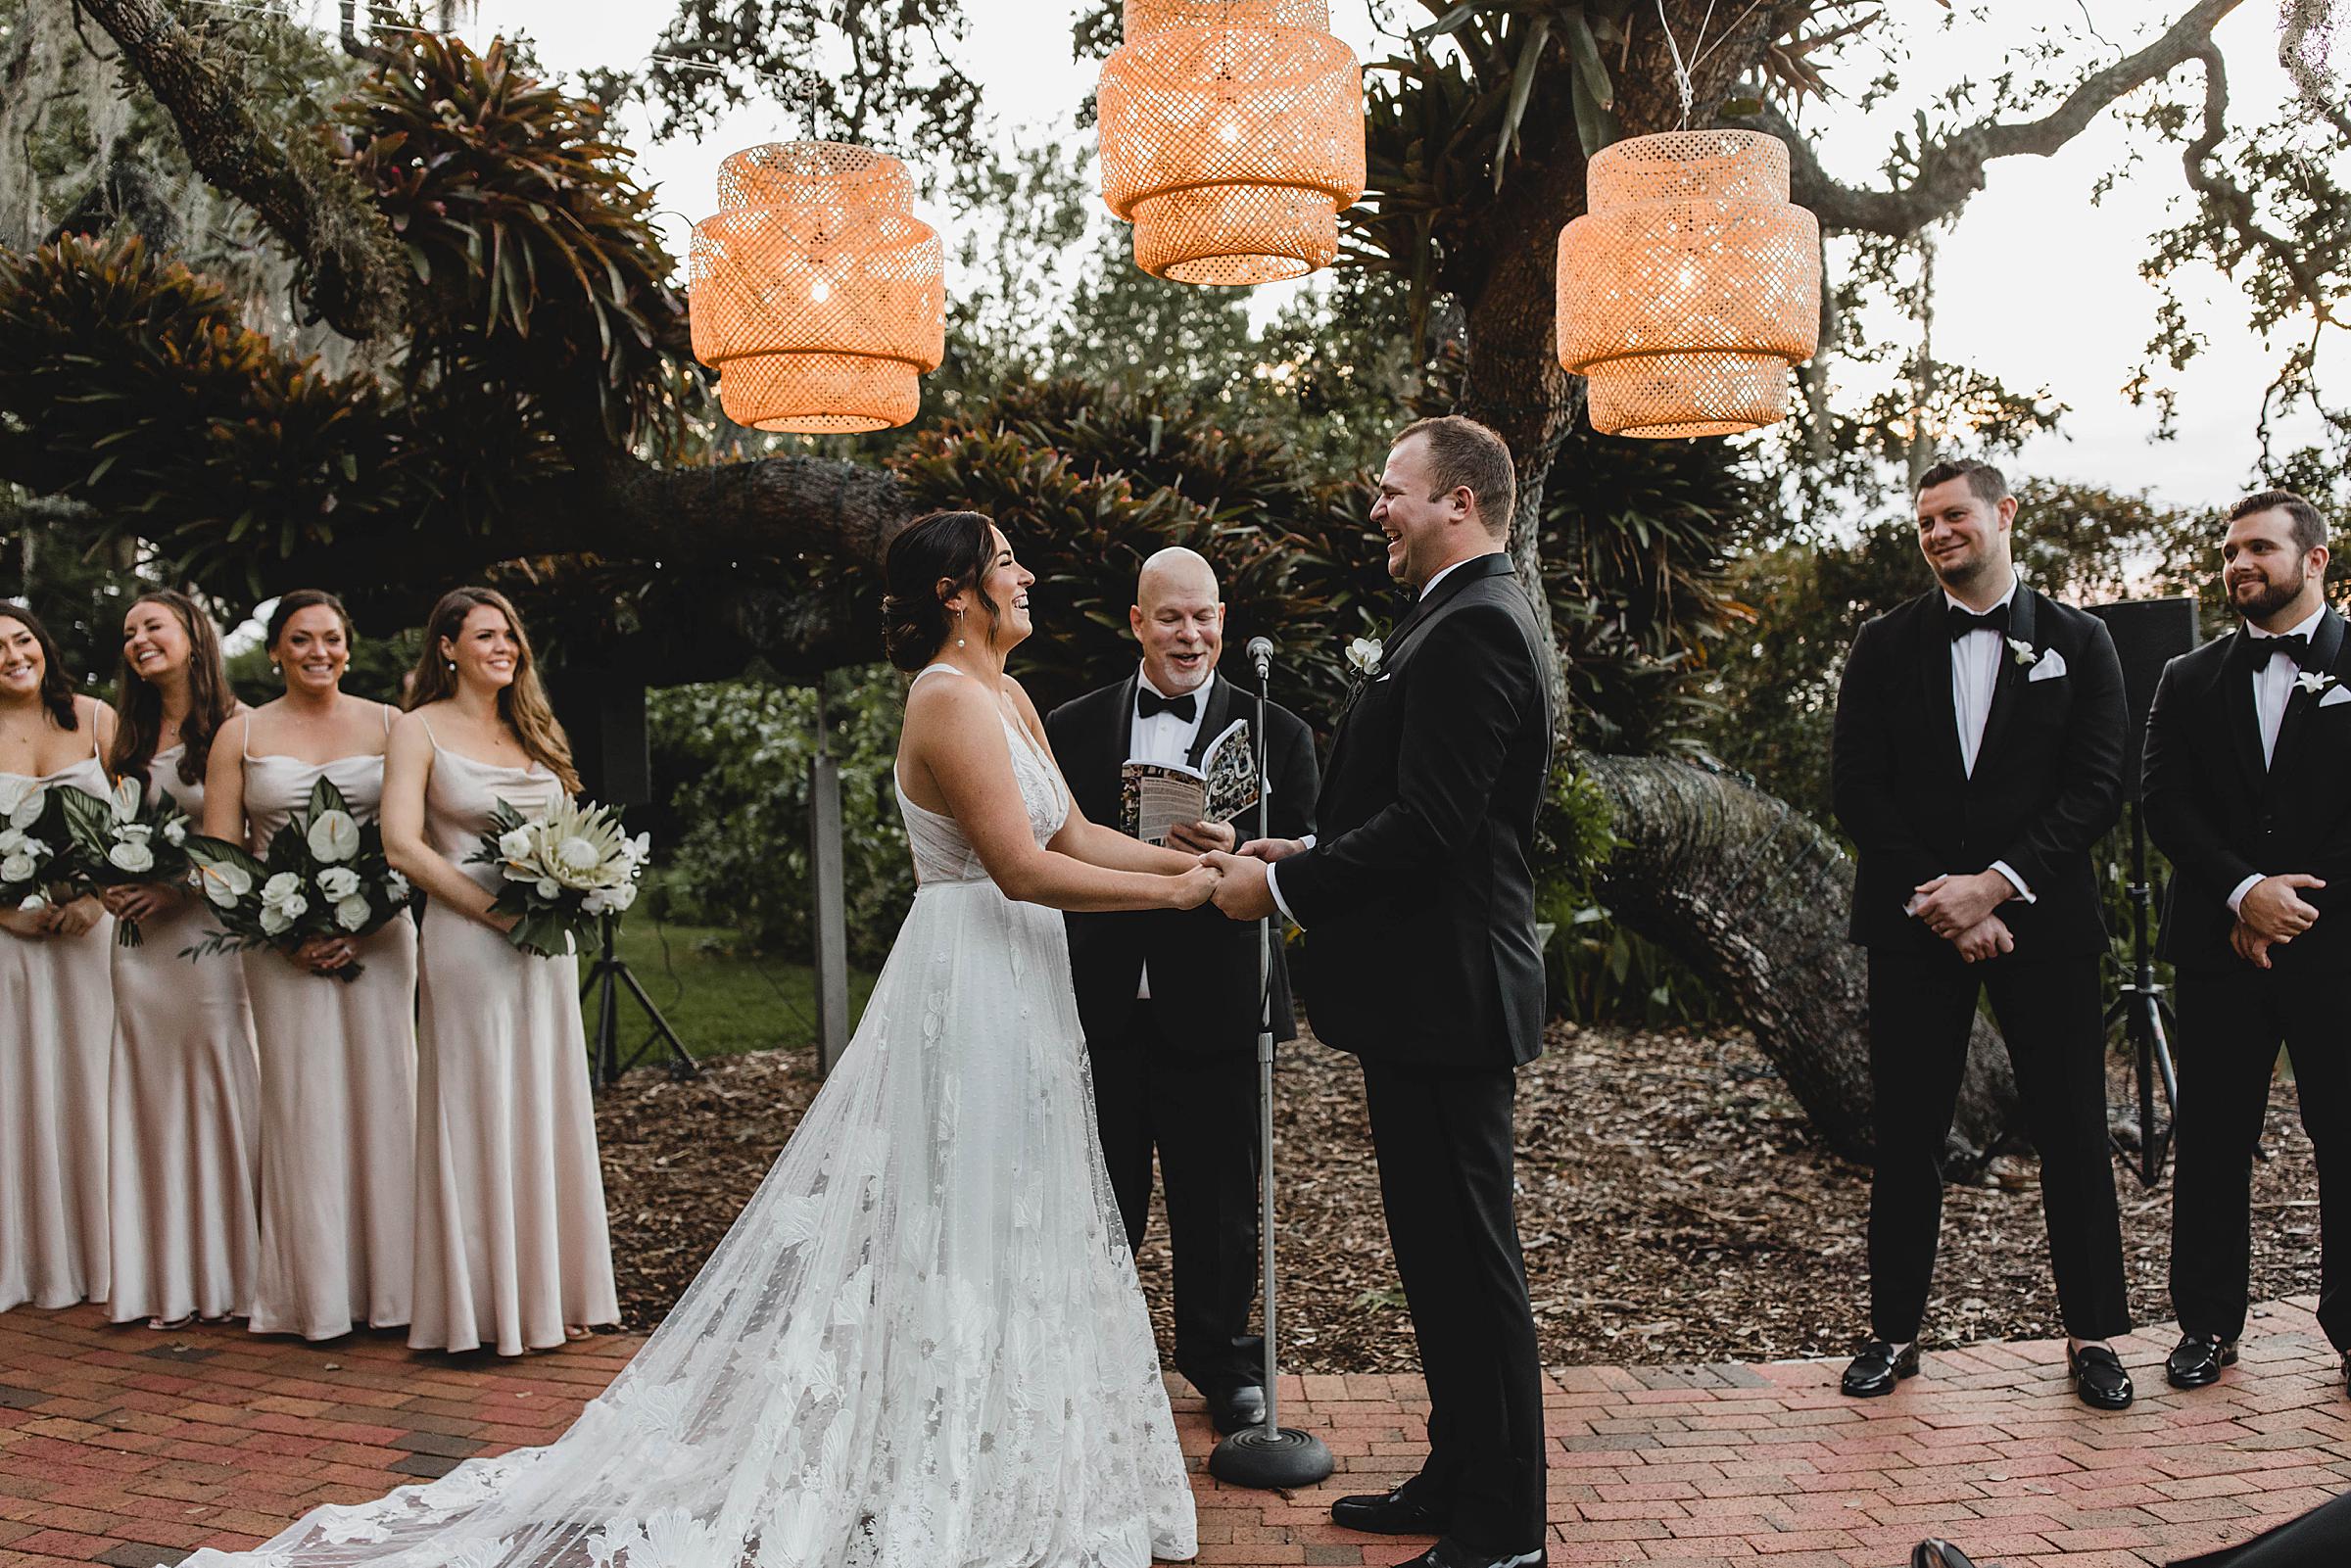 Marie Selby Botanical Gardens wedding, couple laughing during ceremony in front of large oak tree